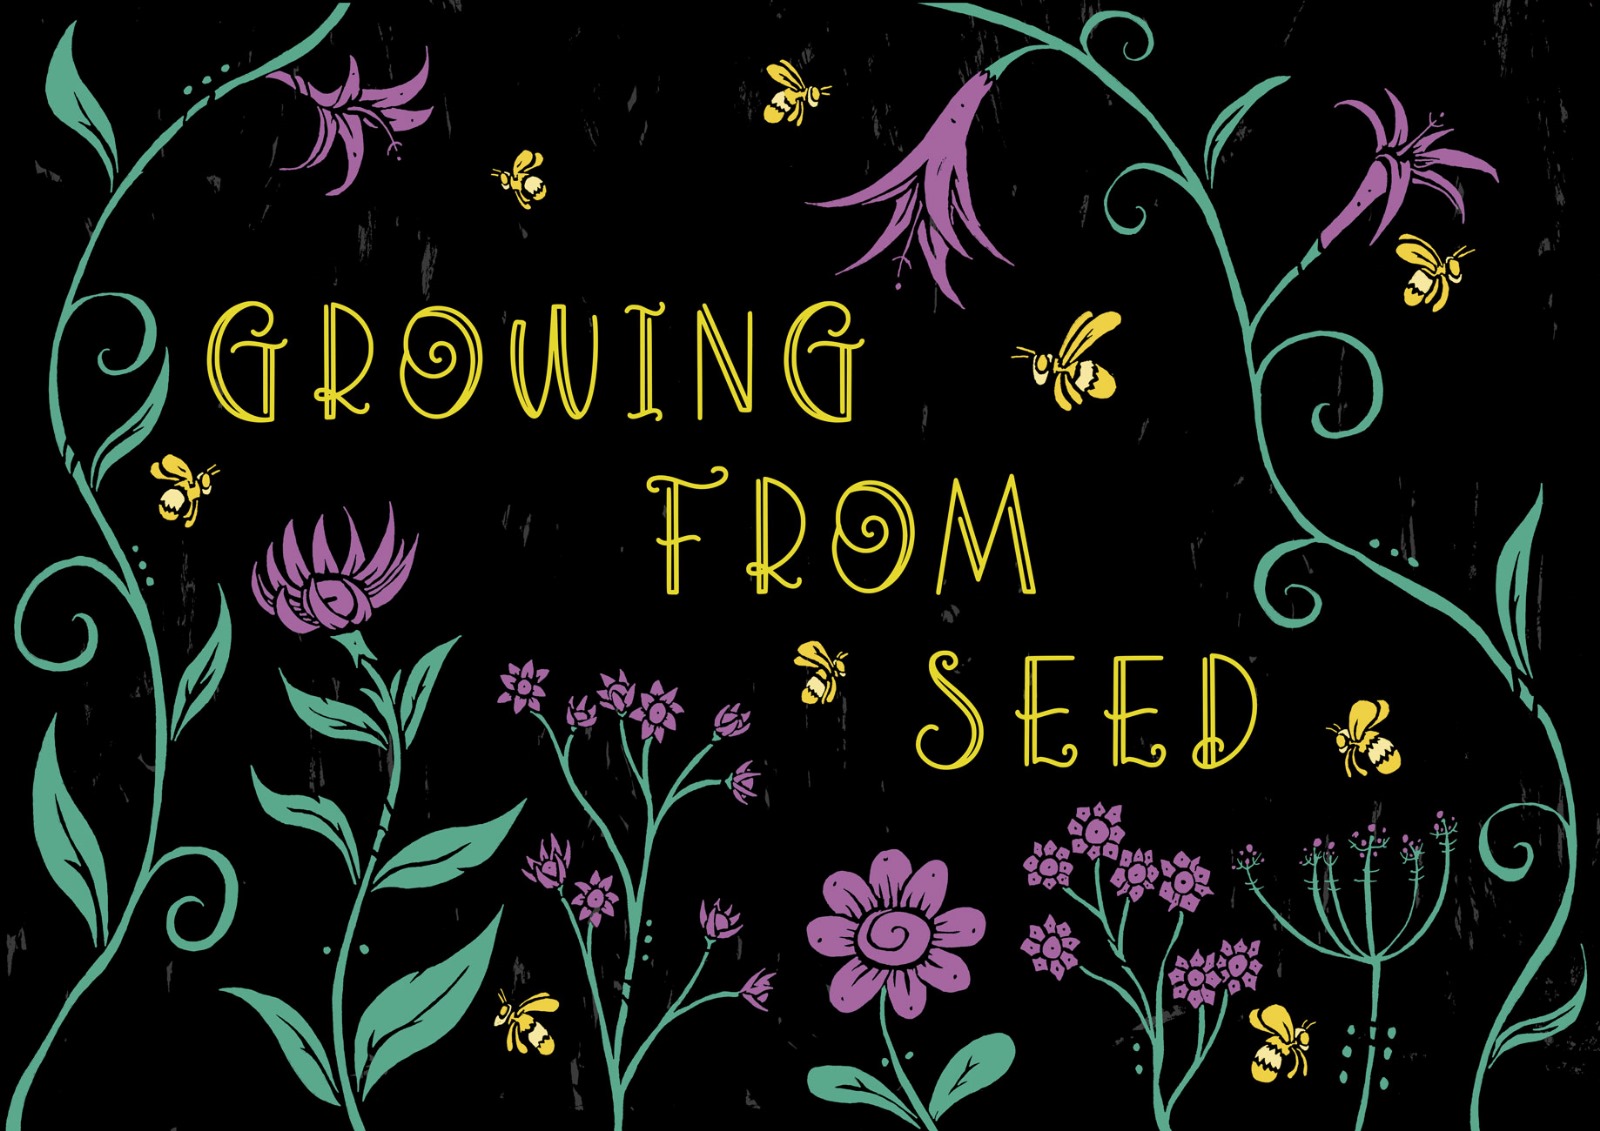 Growing from Seed Workshop 10th April